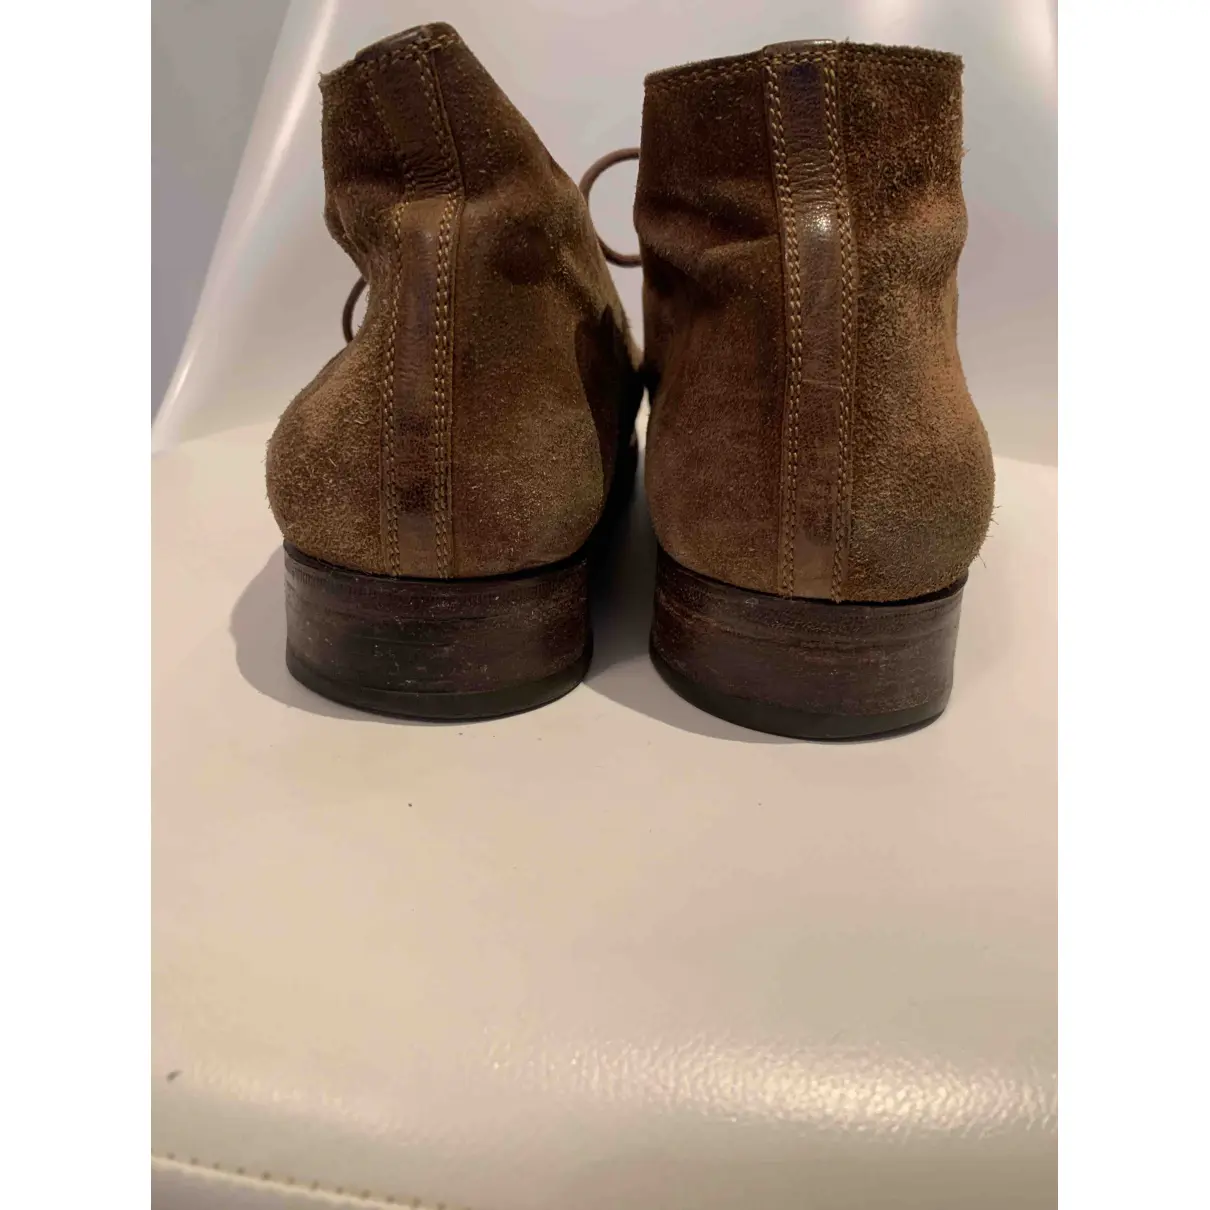 Camel Suede Boots N.D.C. Made by Hand